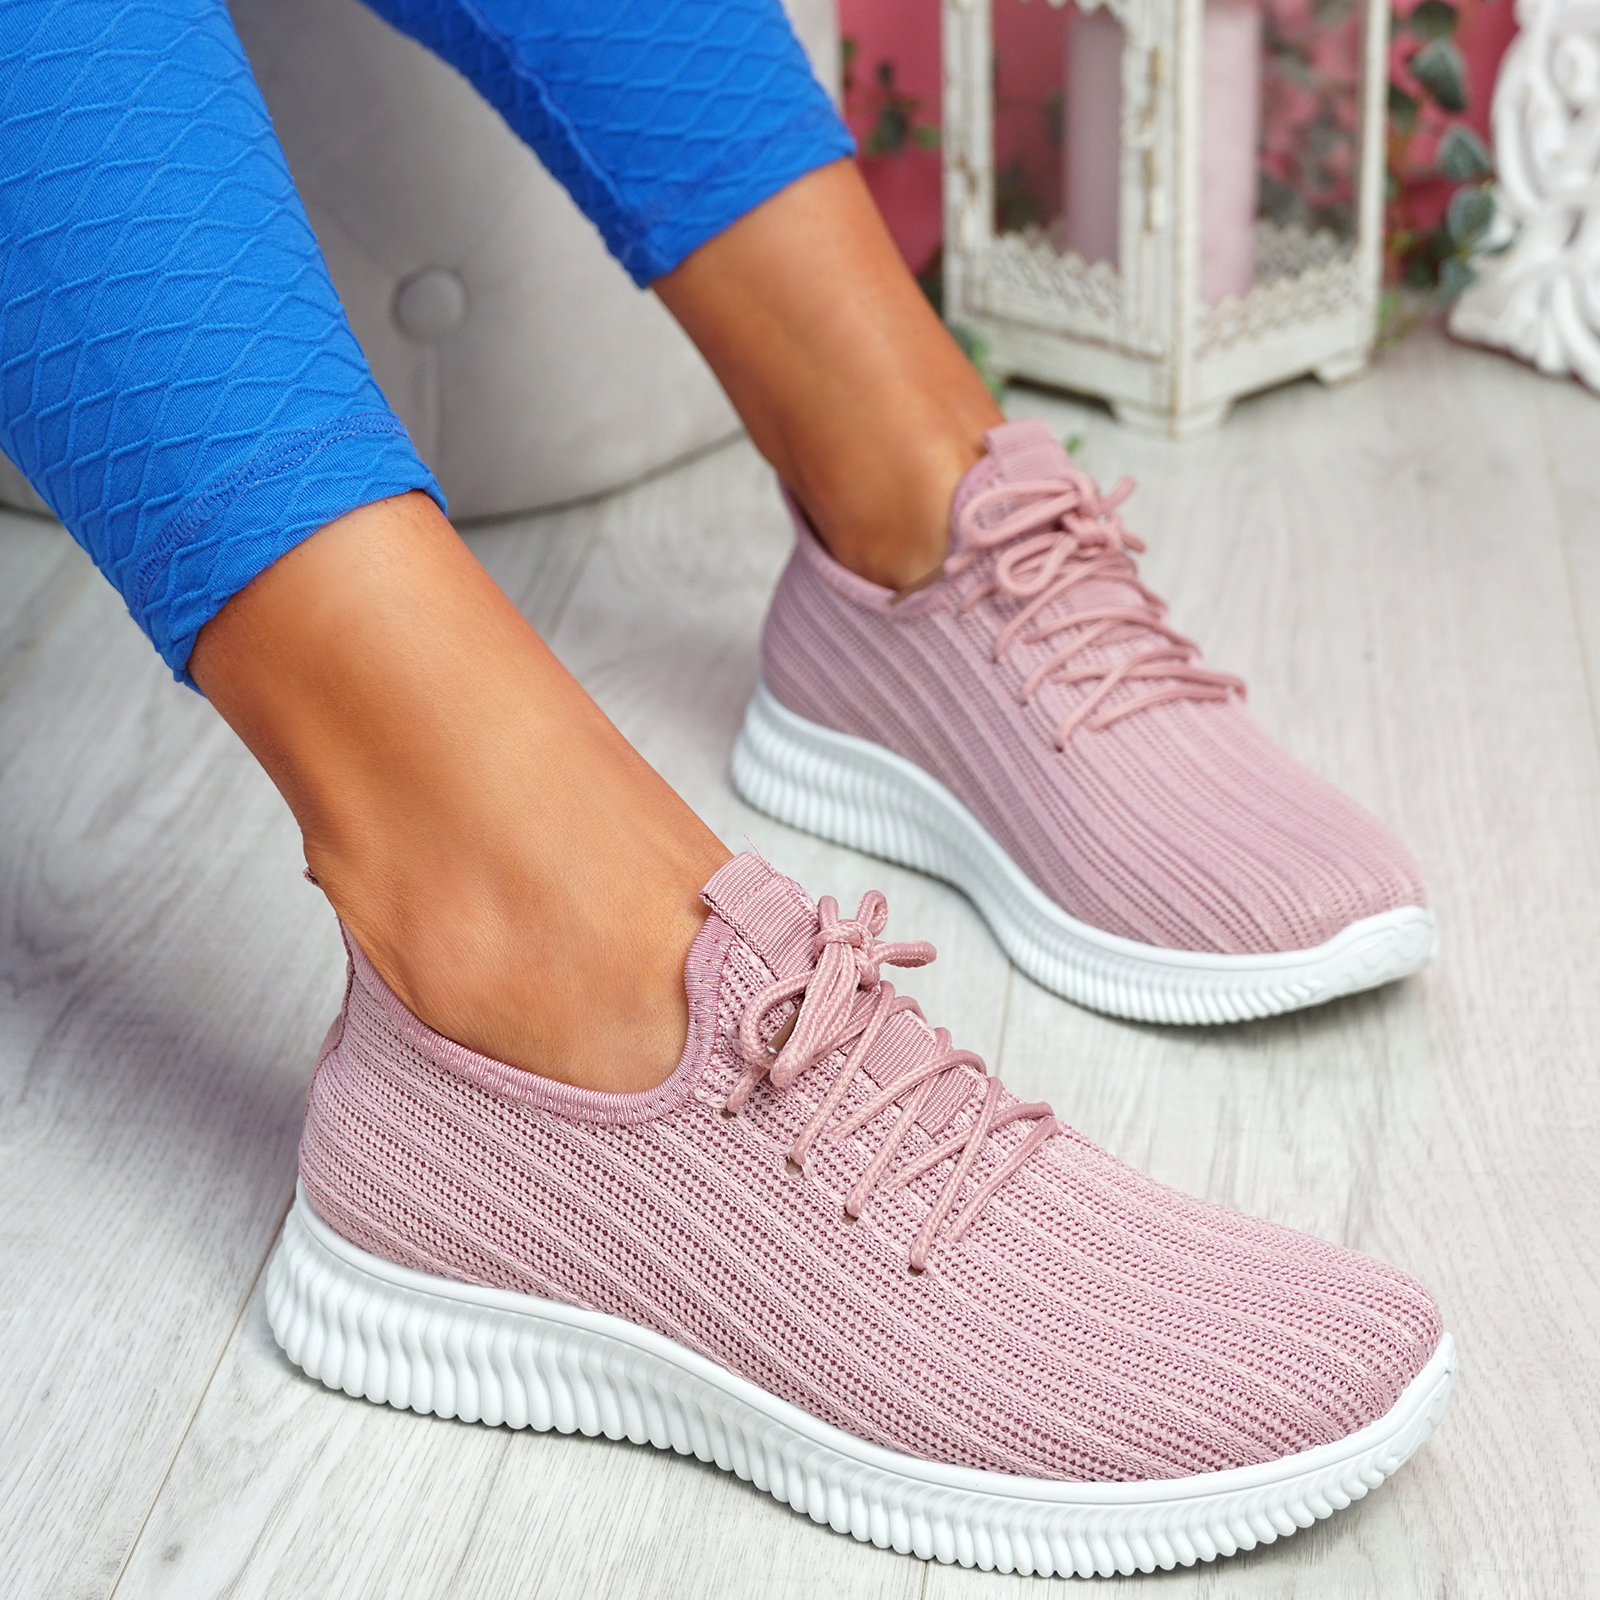 WOMENS LADIES KNIT TRAINERS LACE UP SLIP ON SPORT RUNNING SNEAKERS ...